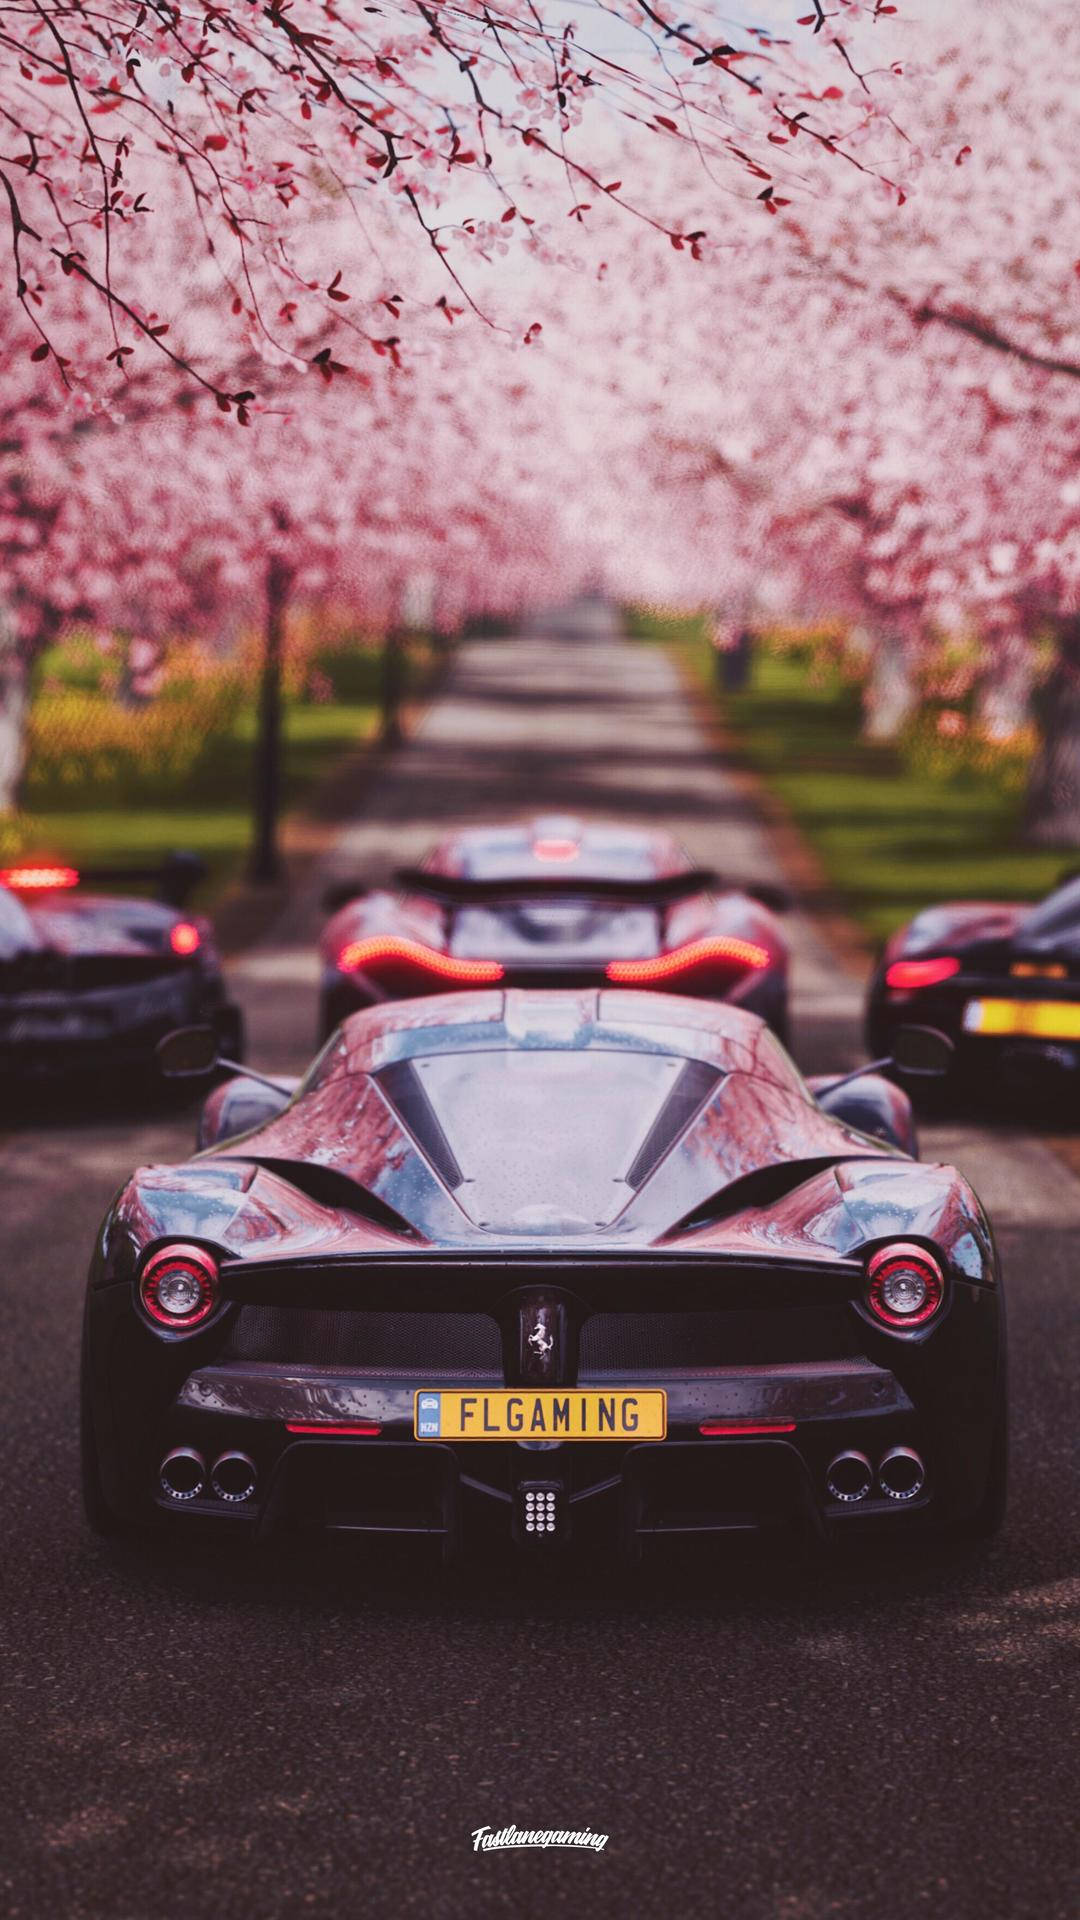 Forza Cherry Blossoms Iphone Wallpaper